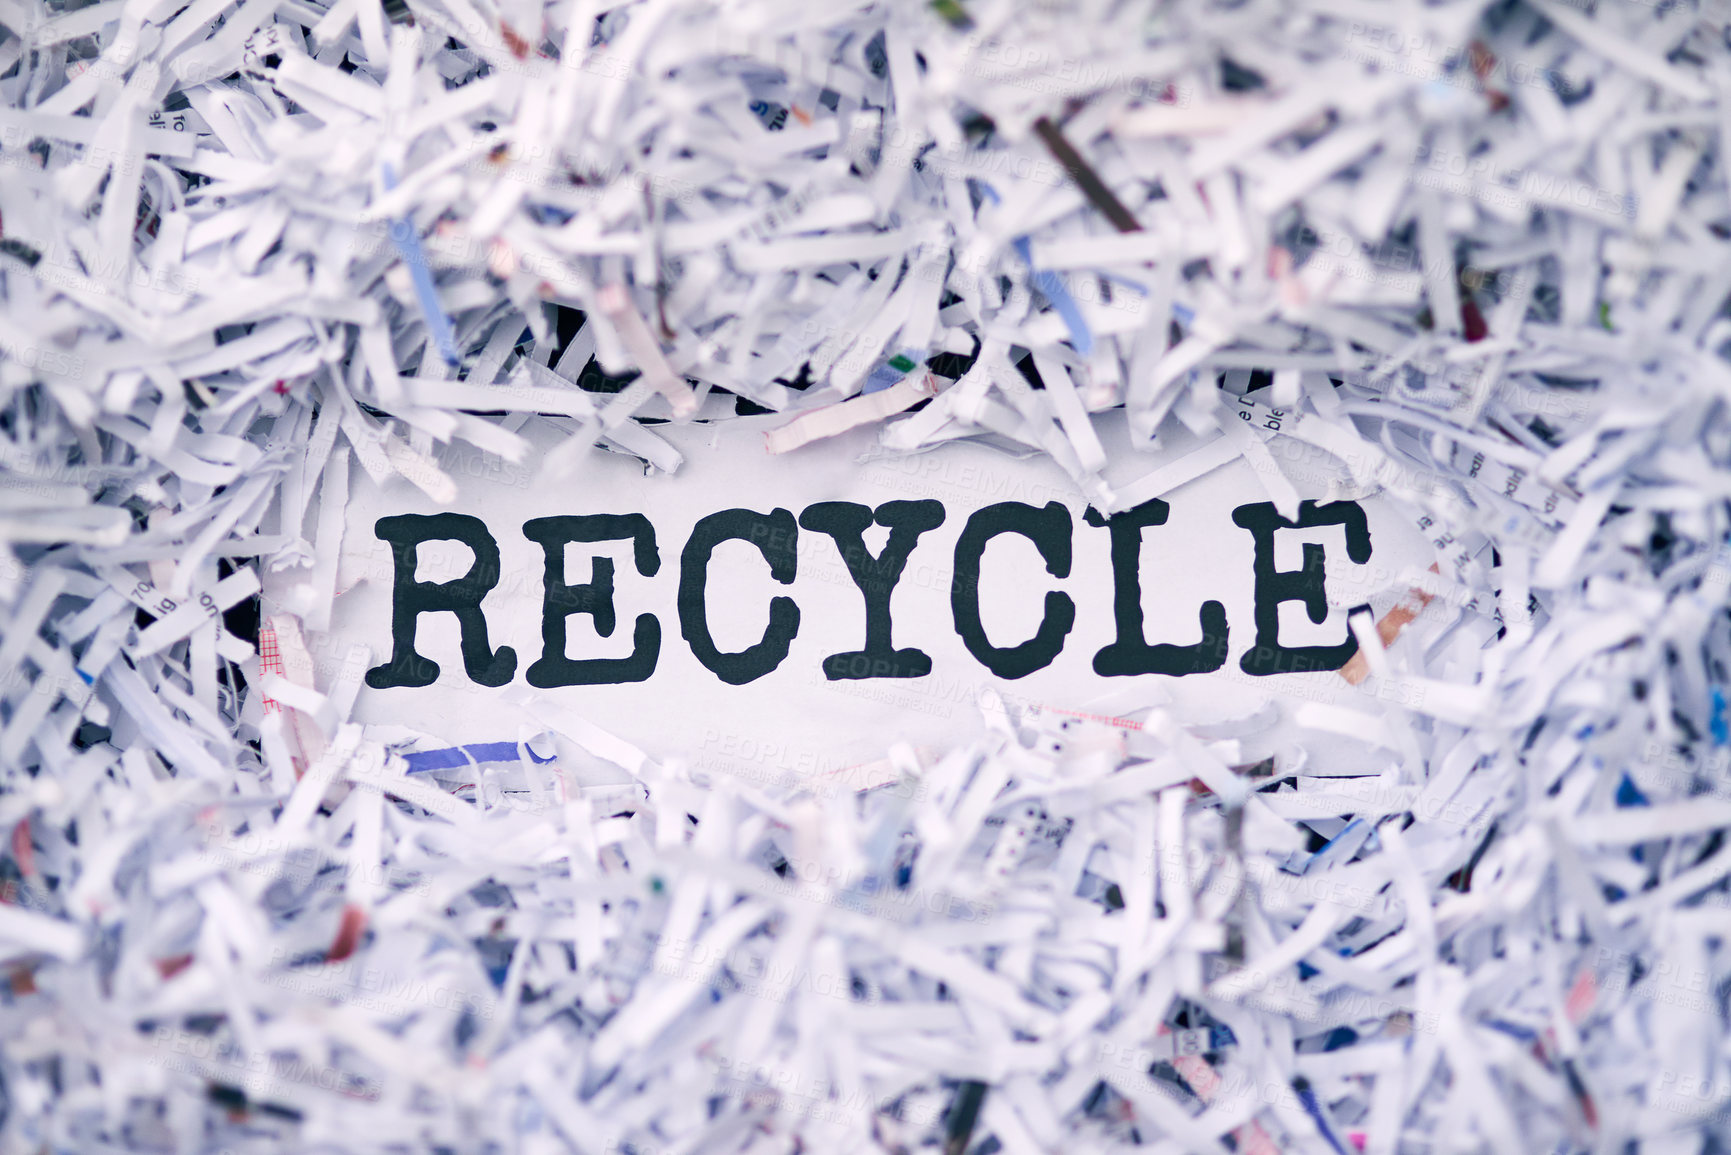 Buy stock photo Shredding, documents and trash bin for recycle in studio or office disposal of confidential waste or paper. Letter or reports, private and top secret information, rubbish and closeup of evidence